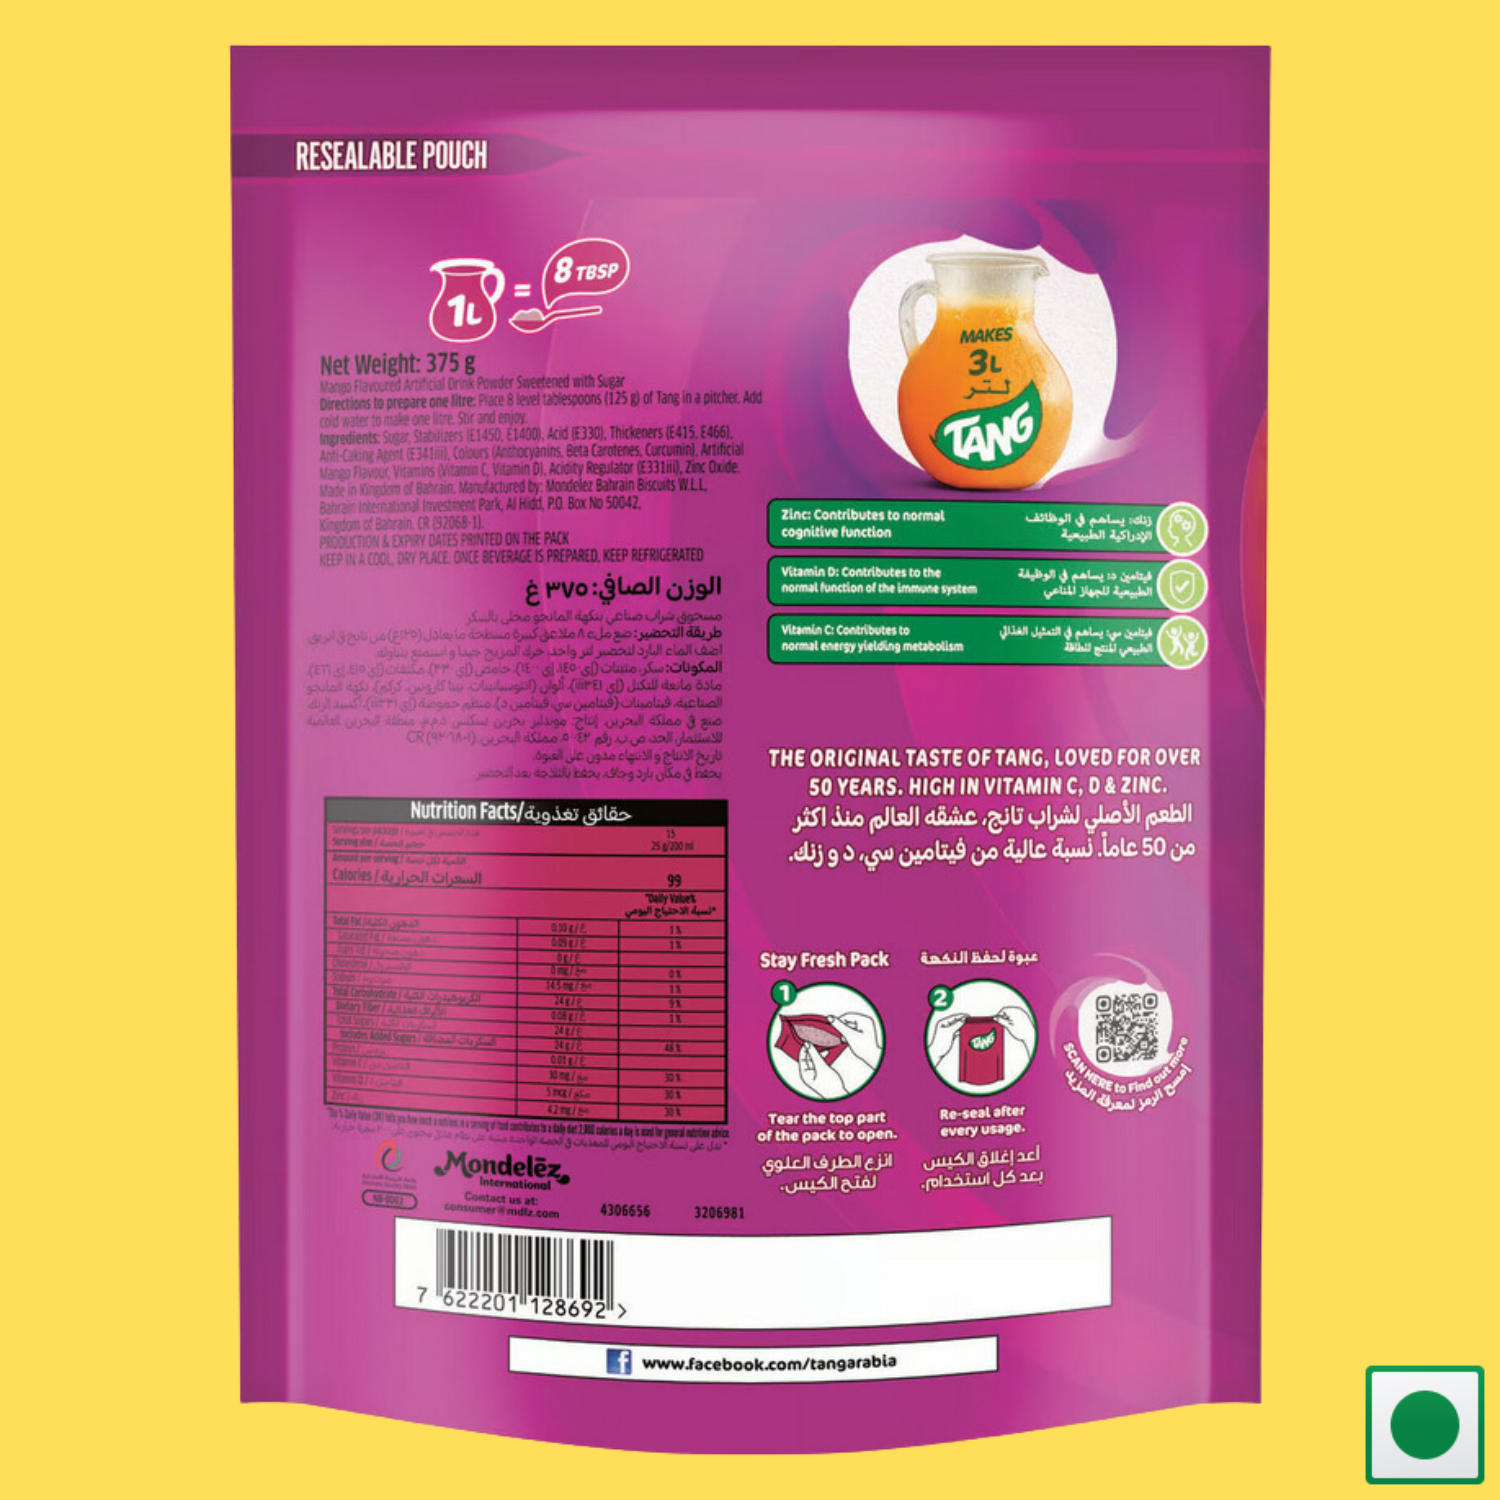 Tang Mango Instant Powdered Drink, 375g (Imported)